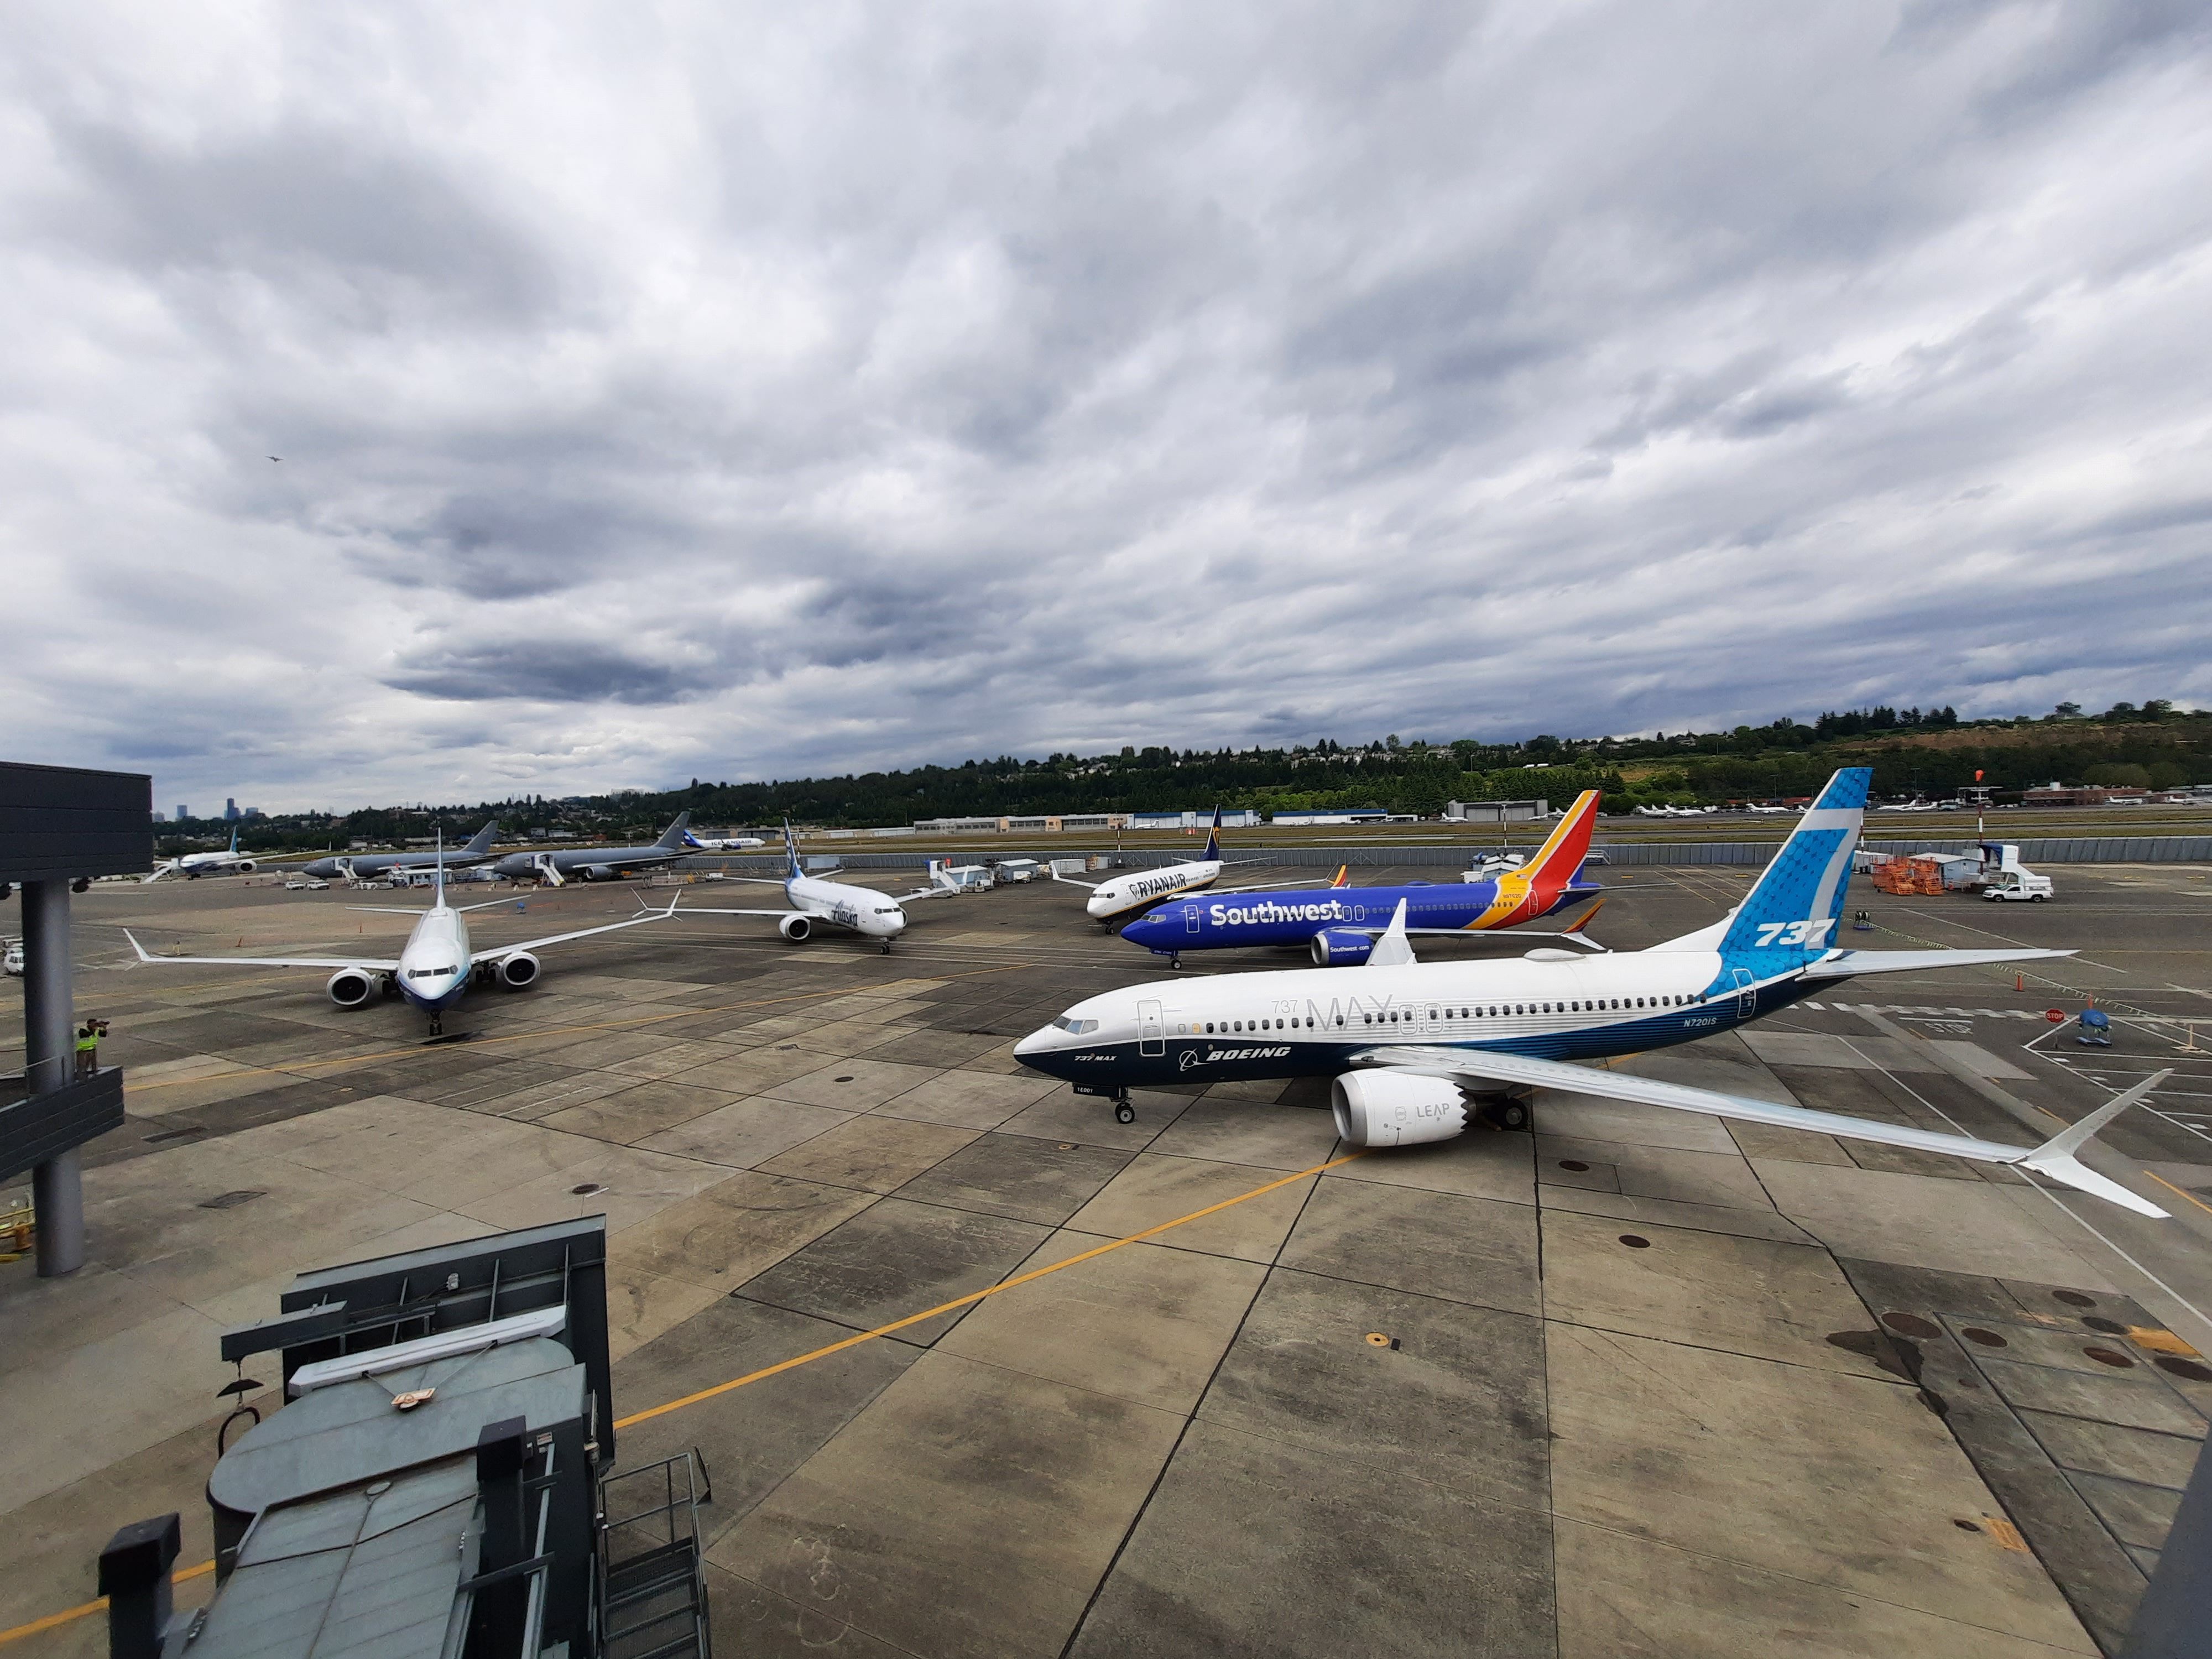 Several Boeing 737 MAX aircraft parked at an airport.